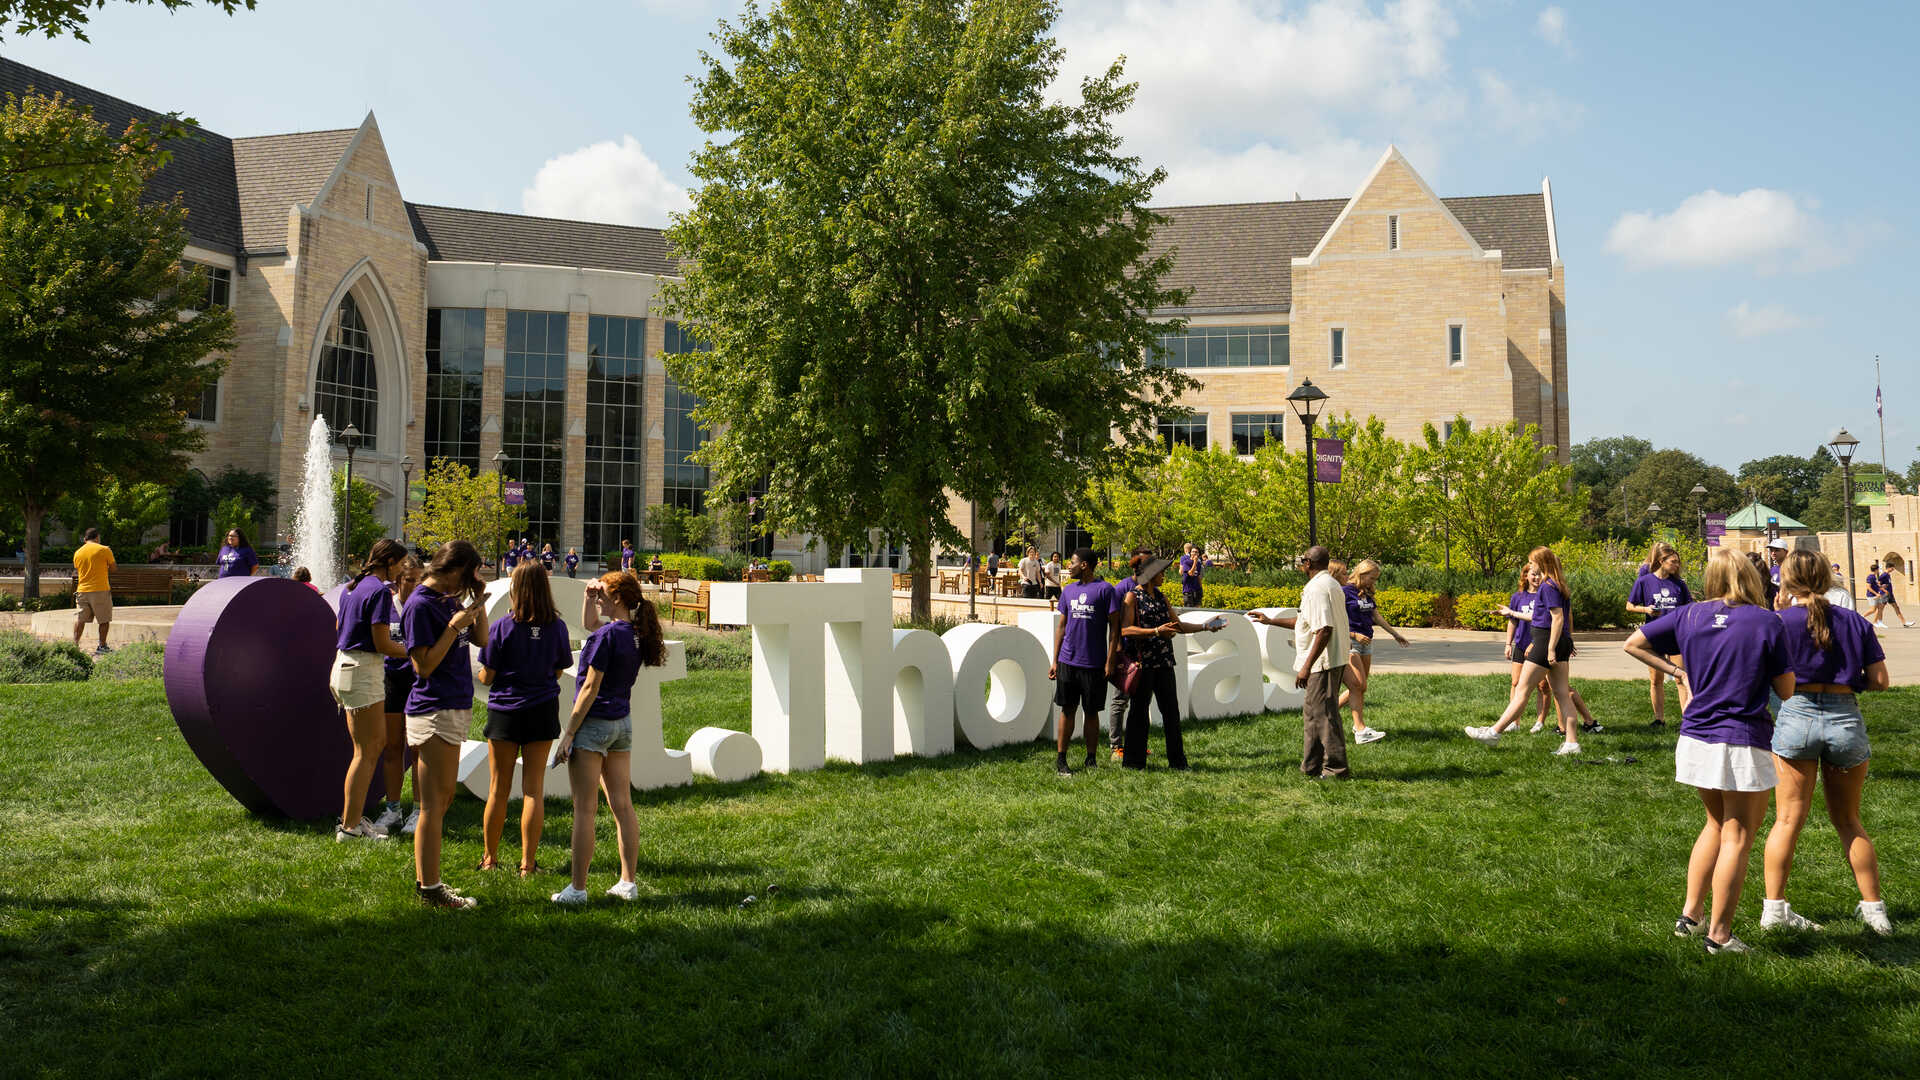 Students standing next to giant letters